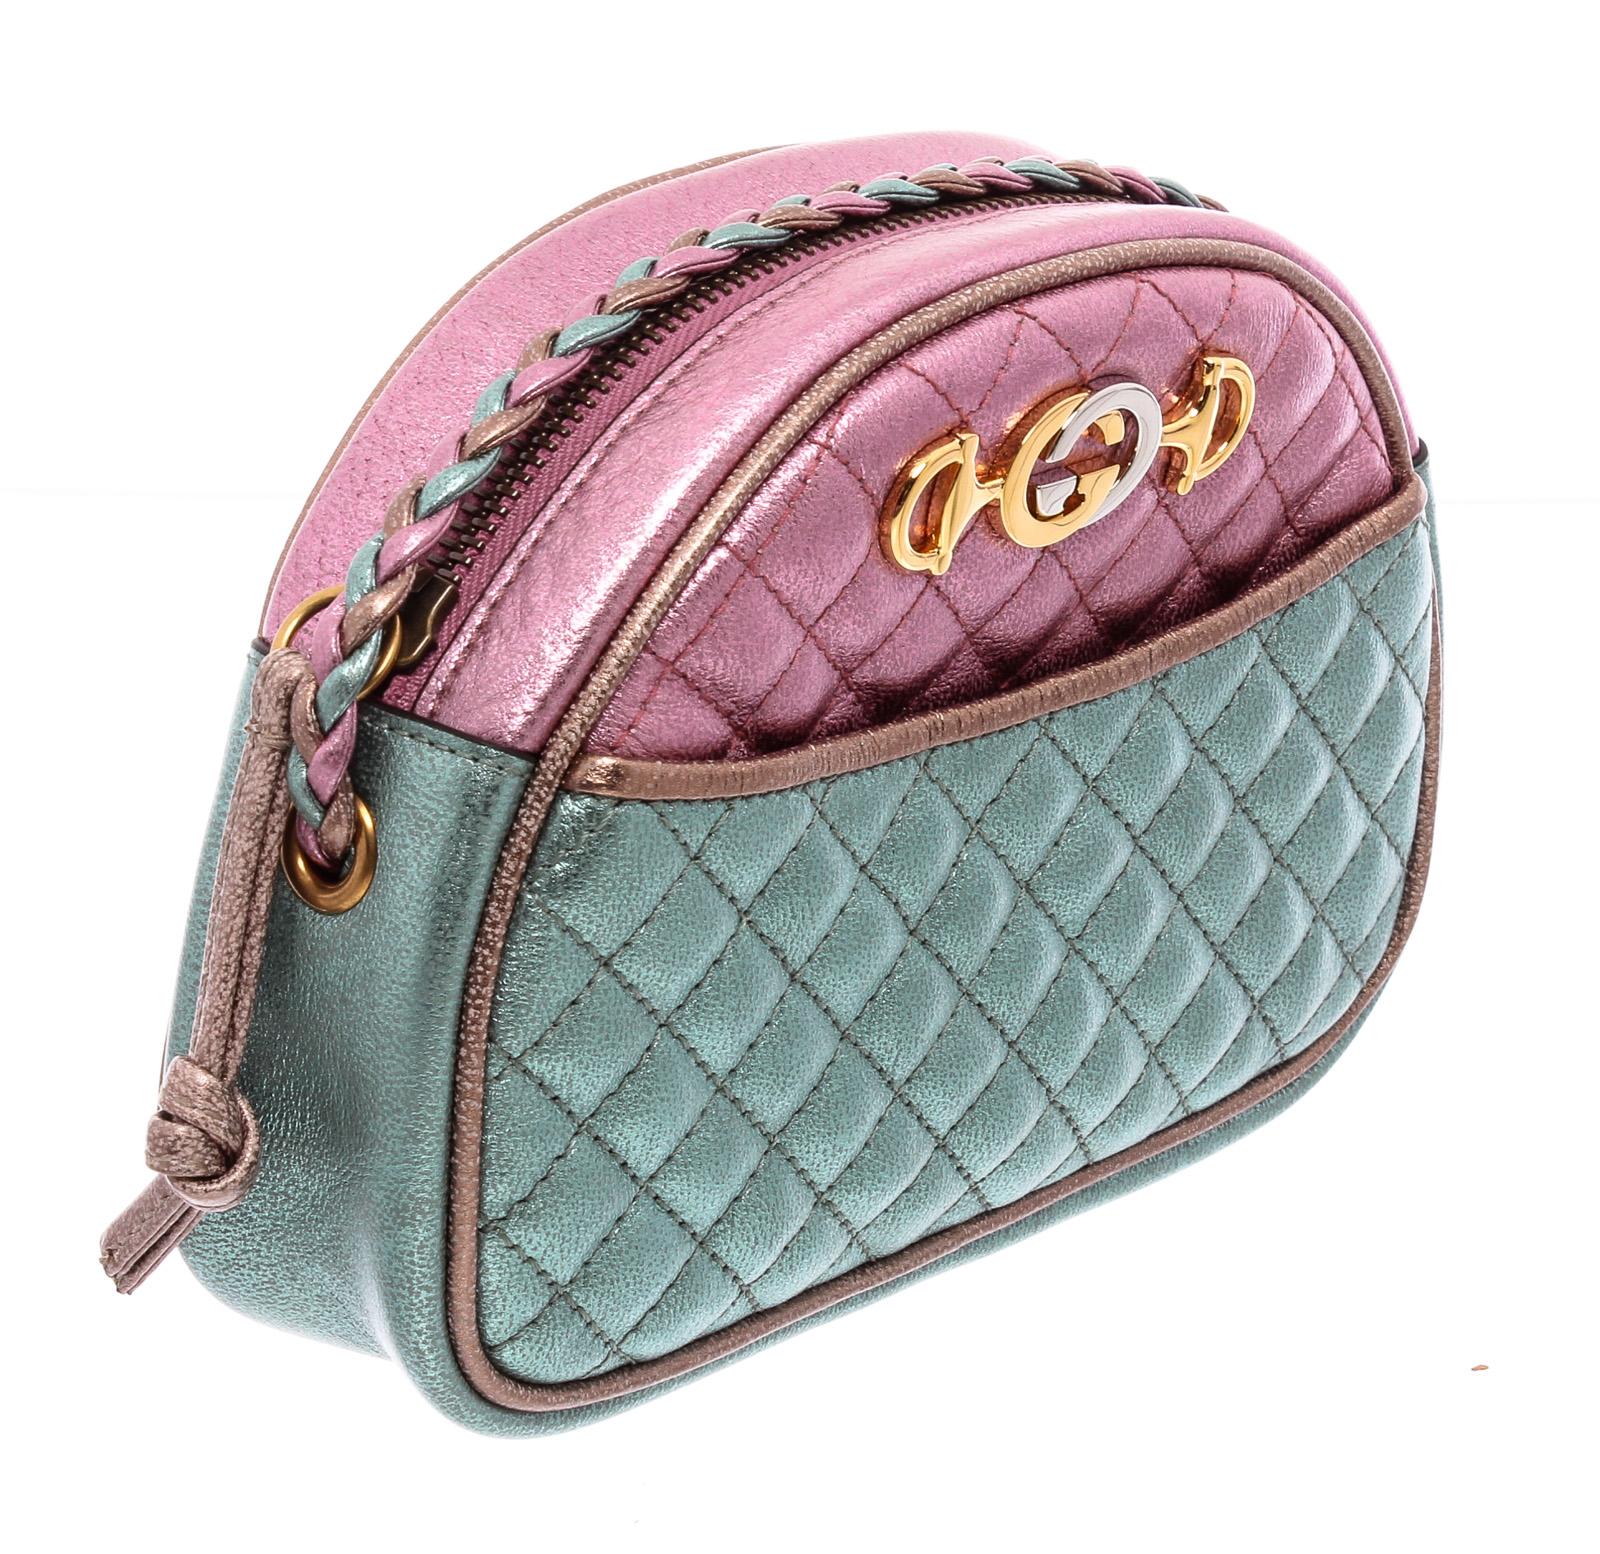 pink and blue gucci bag